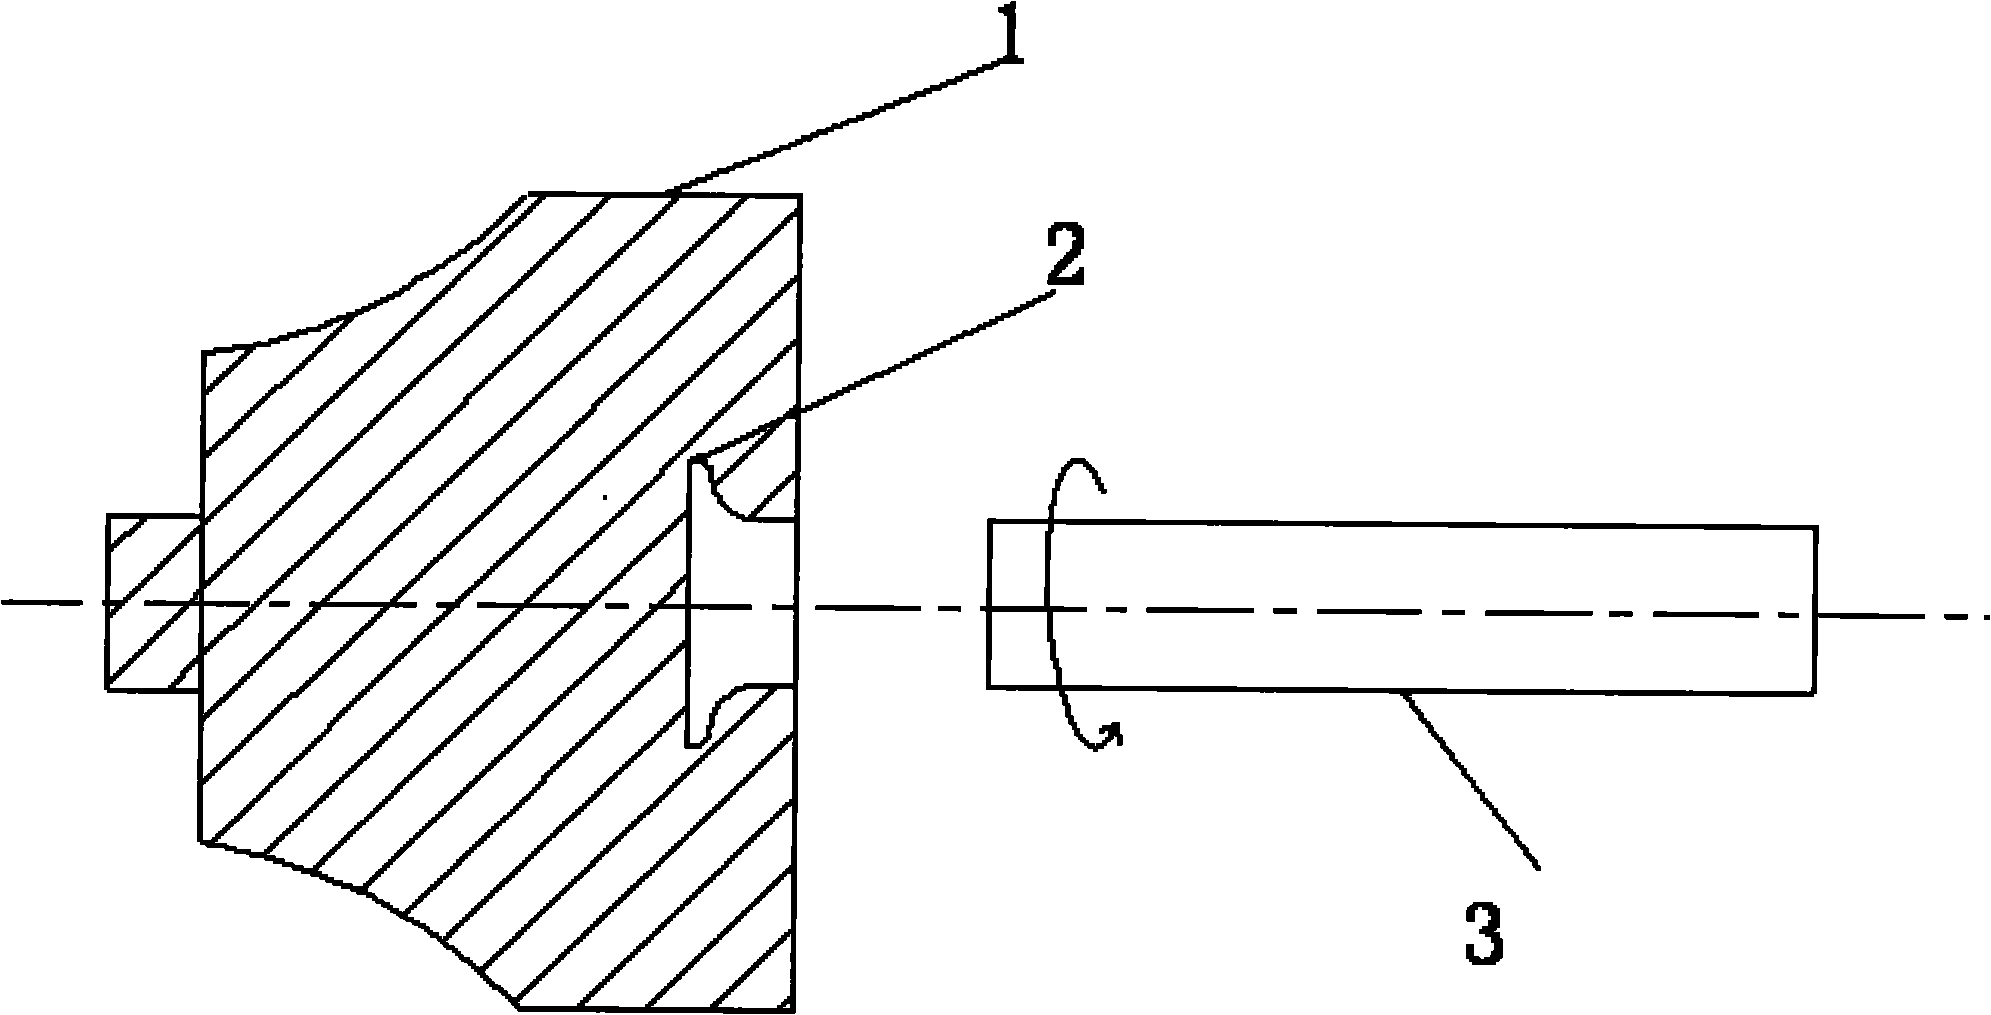 Friction welding method of titanium-aluminum alloy turbine and 42CrMo quenched and tempered steel shaft